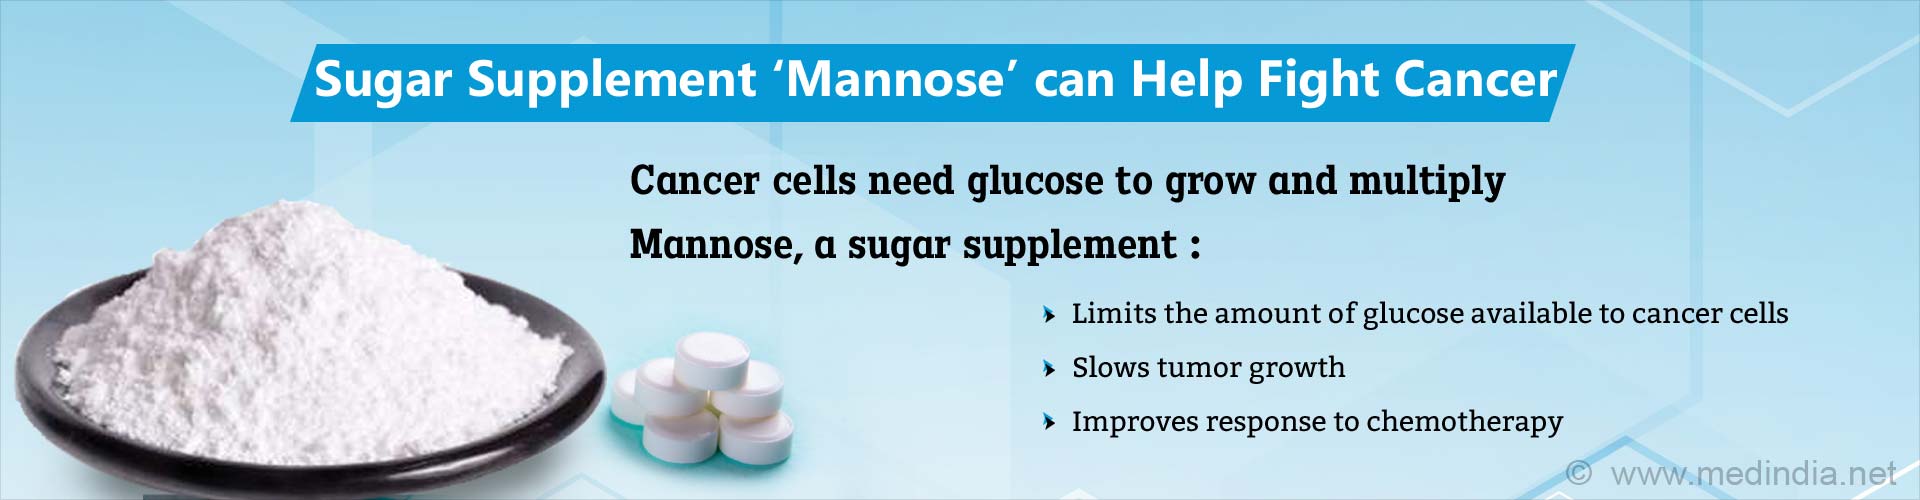 Sugar supplement mannose can help fight cancer. Cancer cells need glucose to grow and multiply Mannose, a sugar supplement: Limits the amount of glucose available to cancer cells, slows tumor growth and improves response to chemotherapy. 